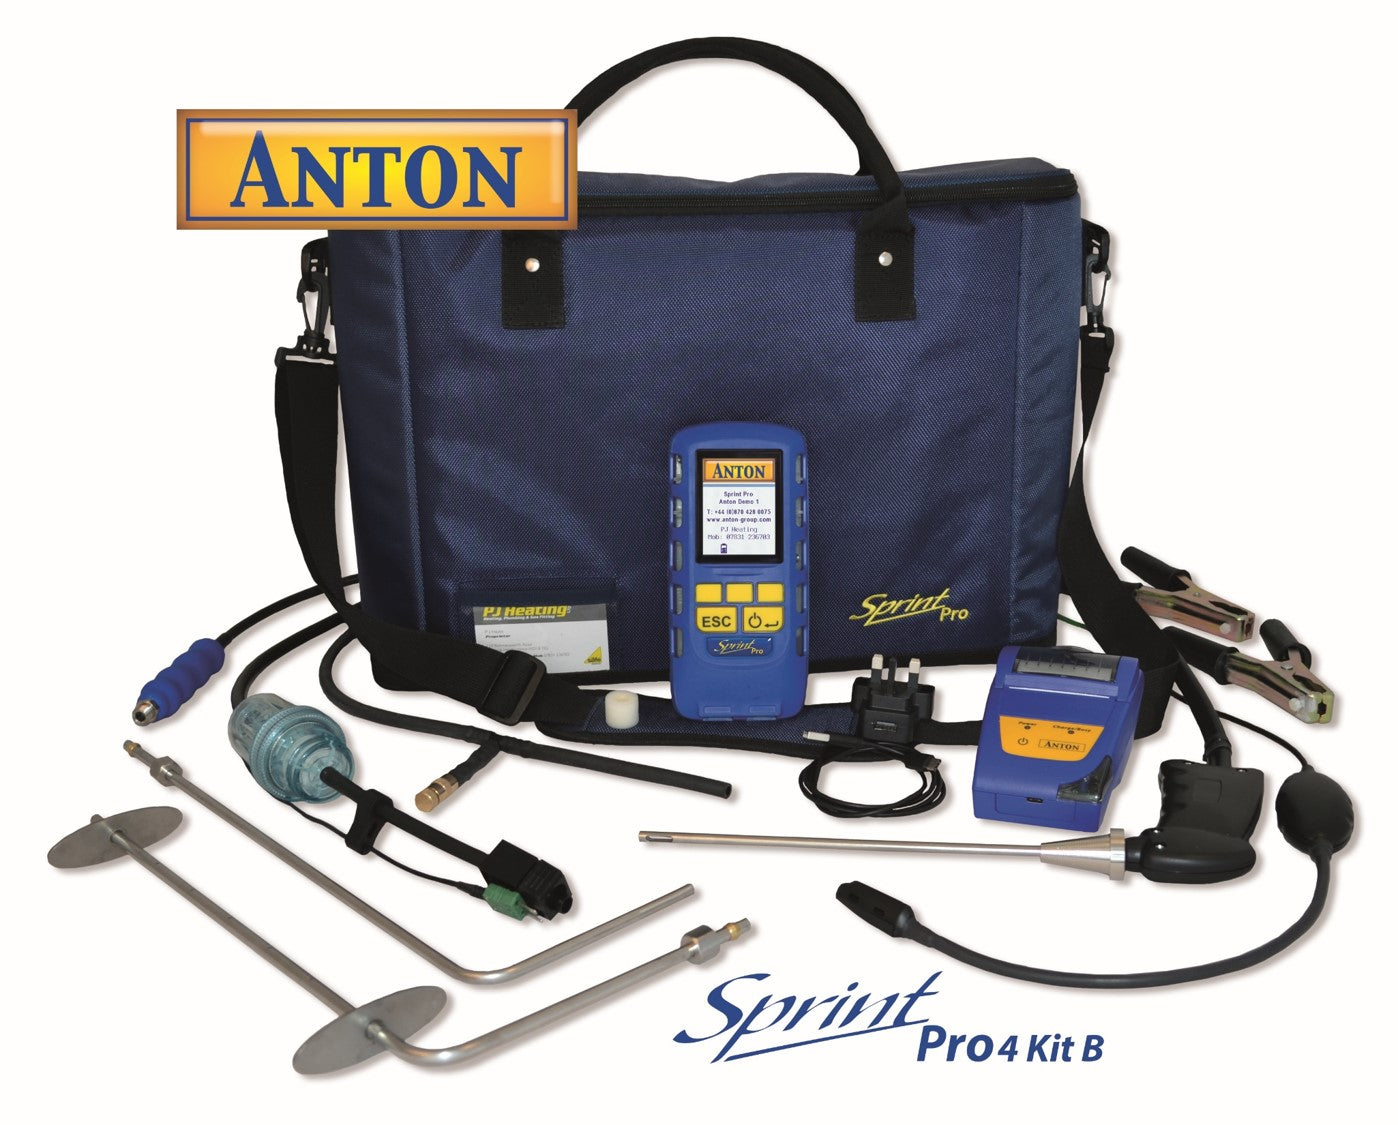 Anton Sprint Pro 4 Kit B with Direct CO2